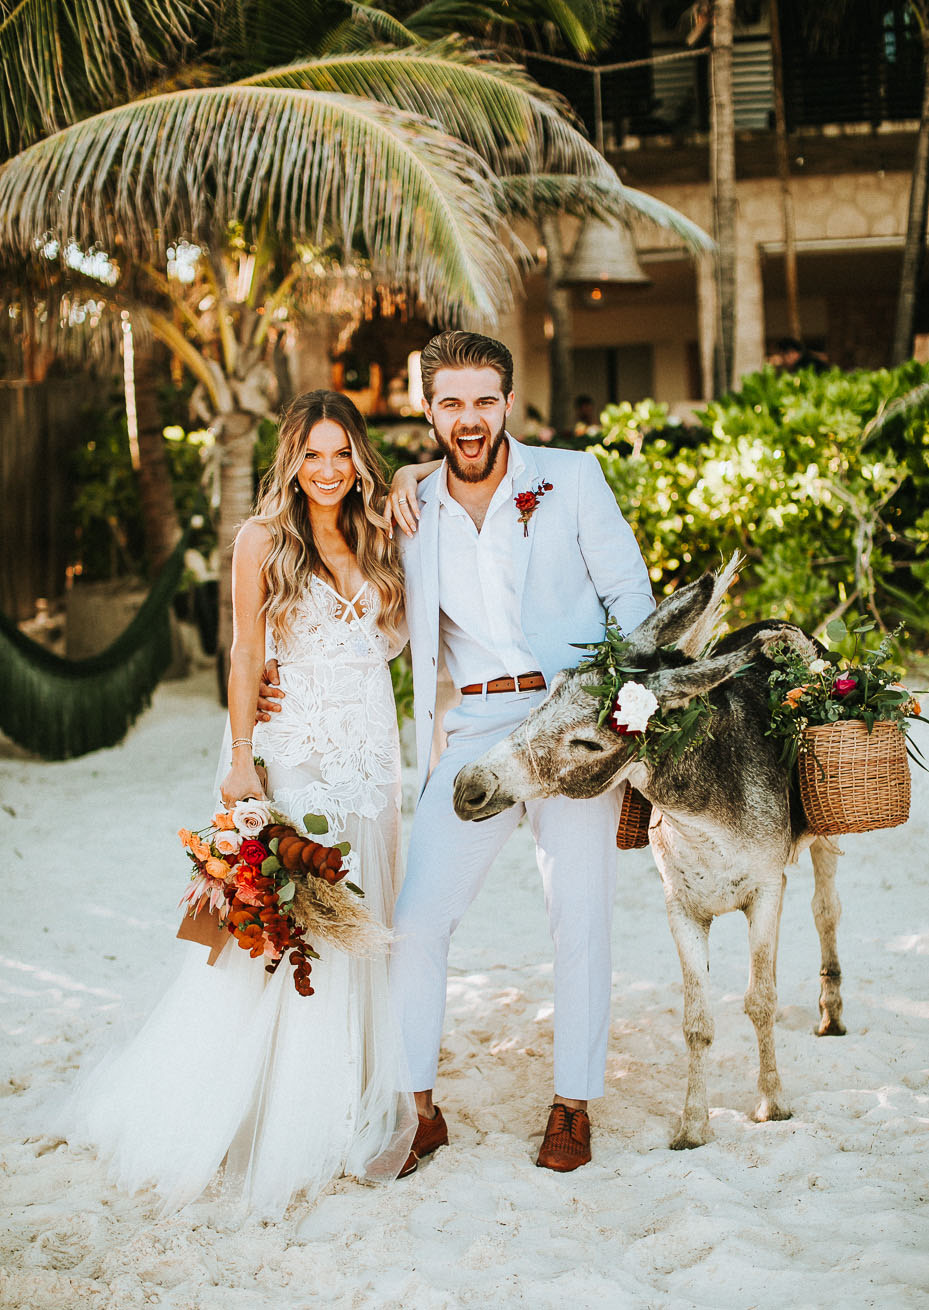 This fun barefoot Tulum wedding was tying the knot of two travelers, so they wanted a destination wedding